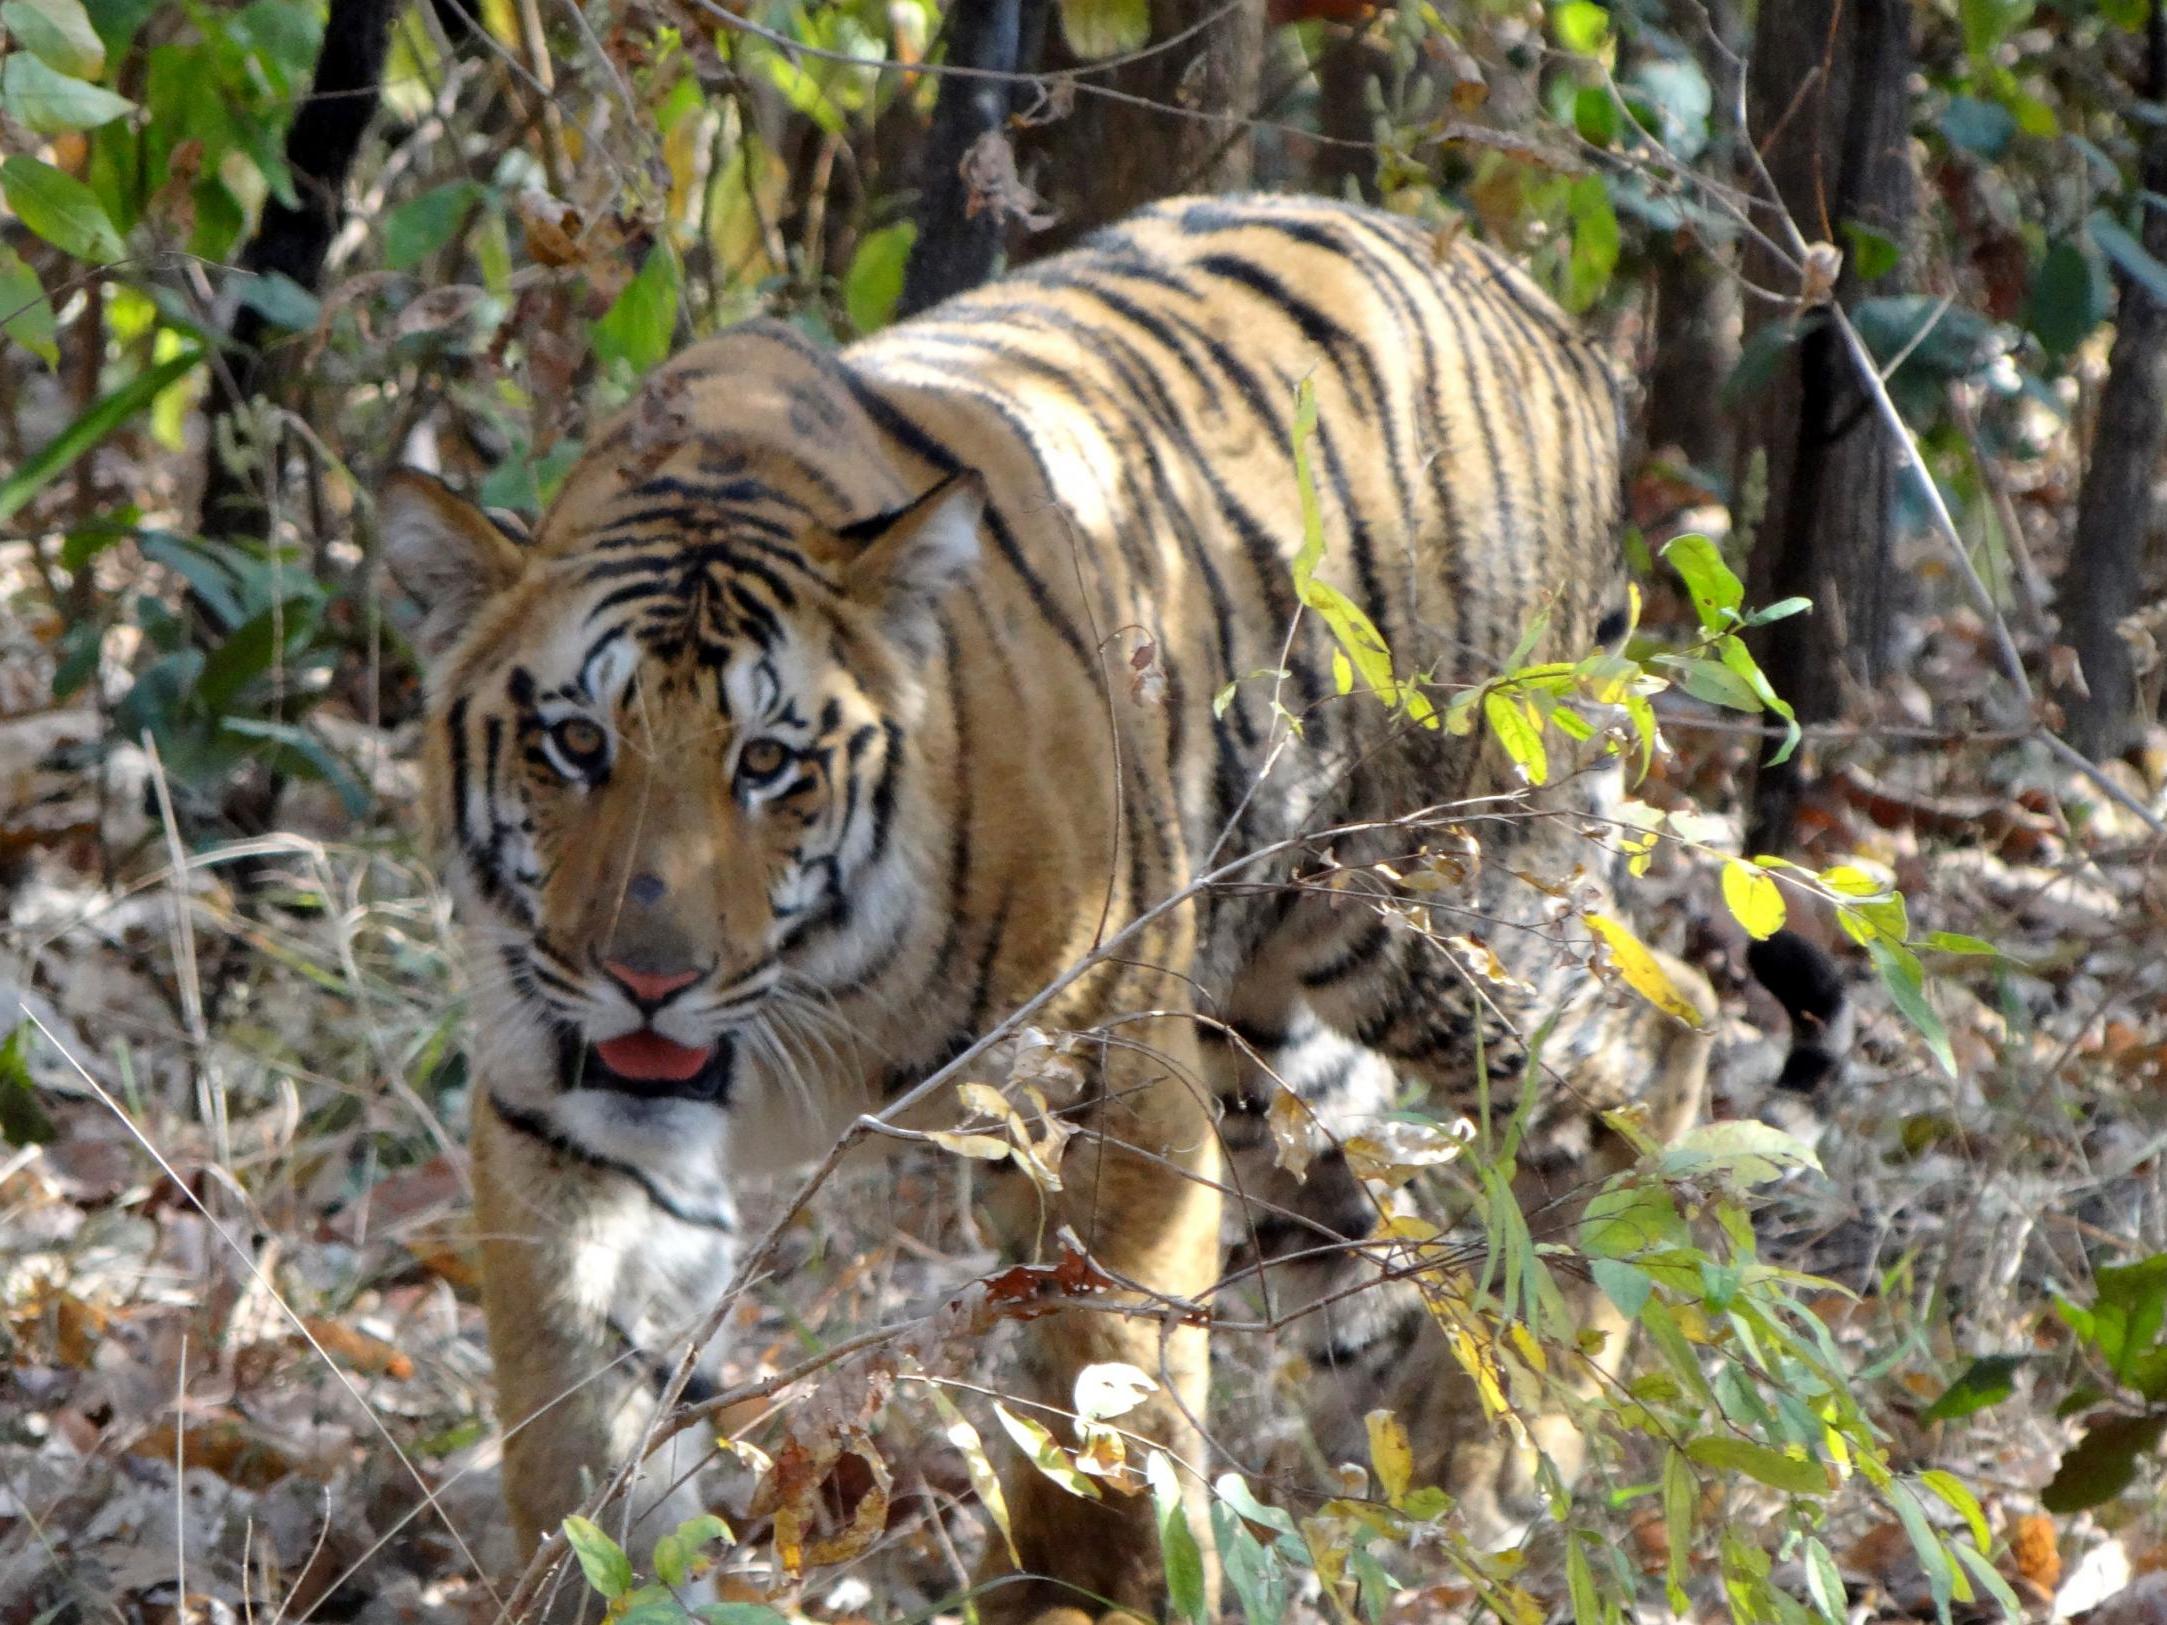 India's tiger population has dwindled over the last two centuries due to poaching and loss of habitat